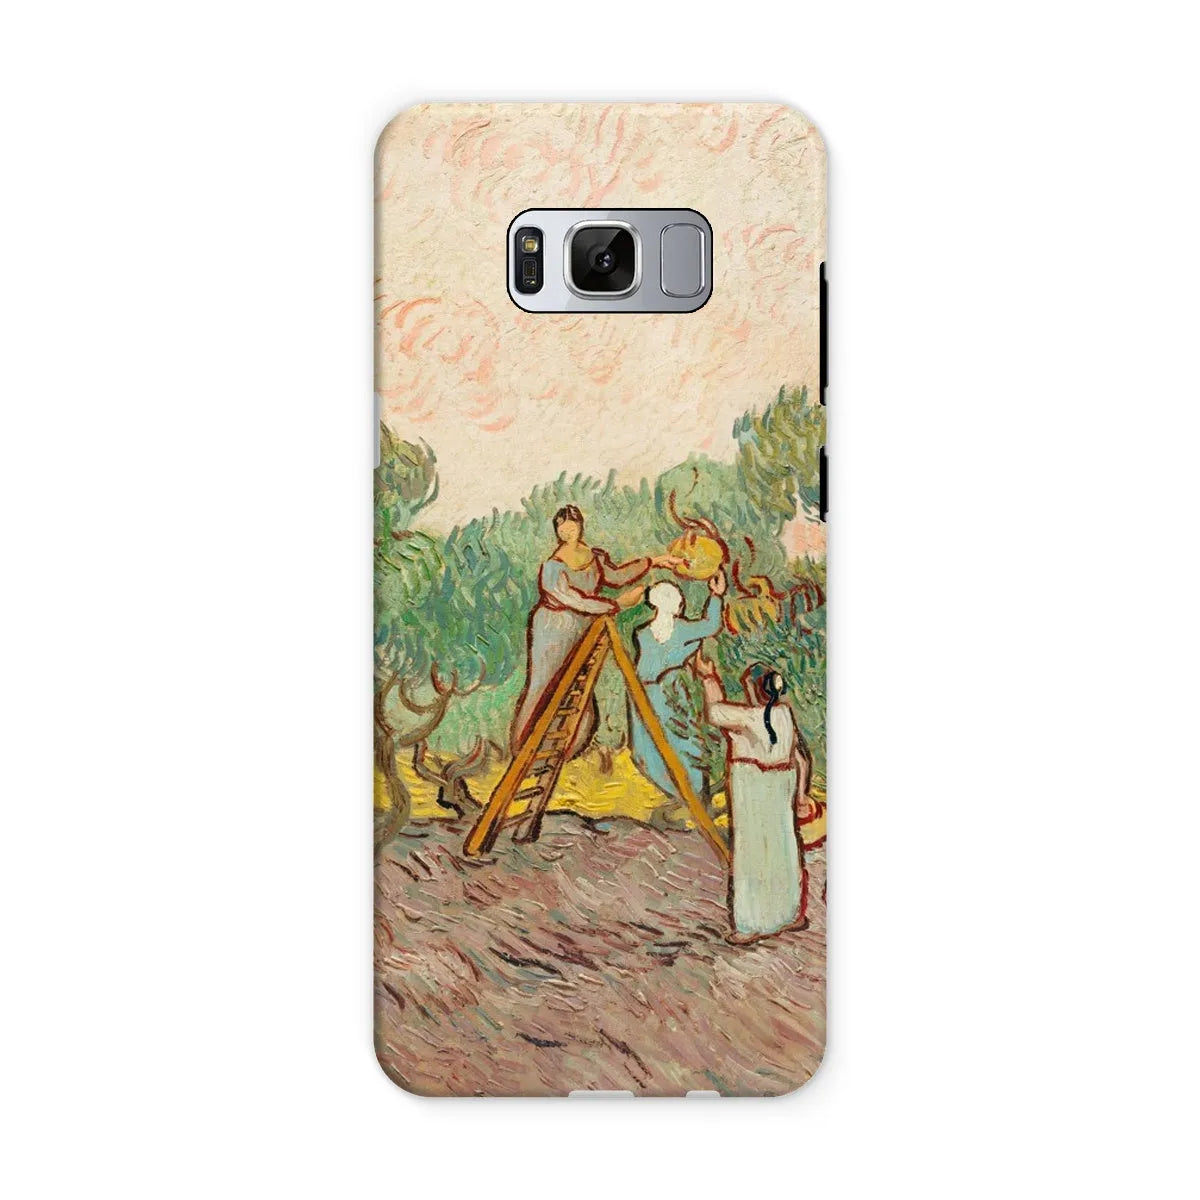 Women Picking Olives - Art Phone Case - Vincent Van Gogh - Samsung Galaxy S8 / Matte - Mobile Phone Cases - Aesthetic